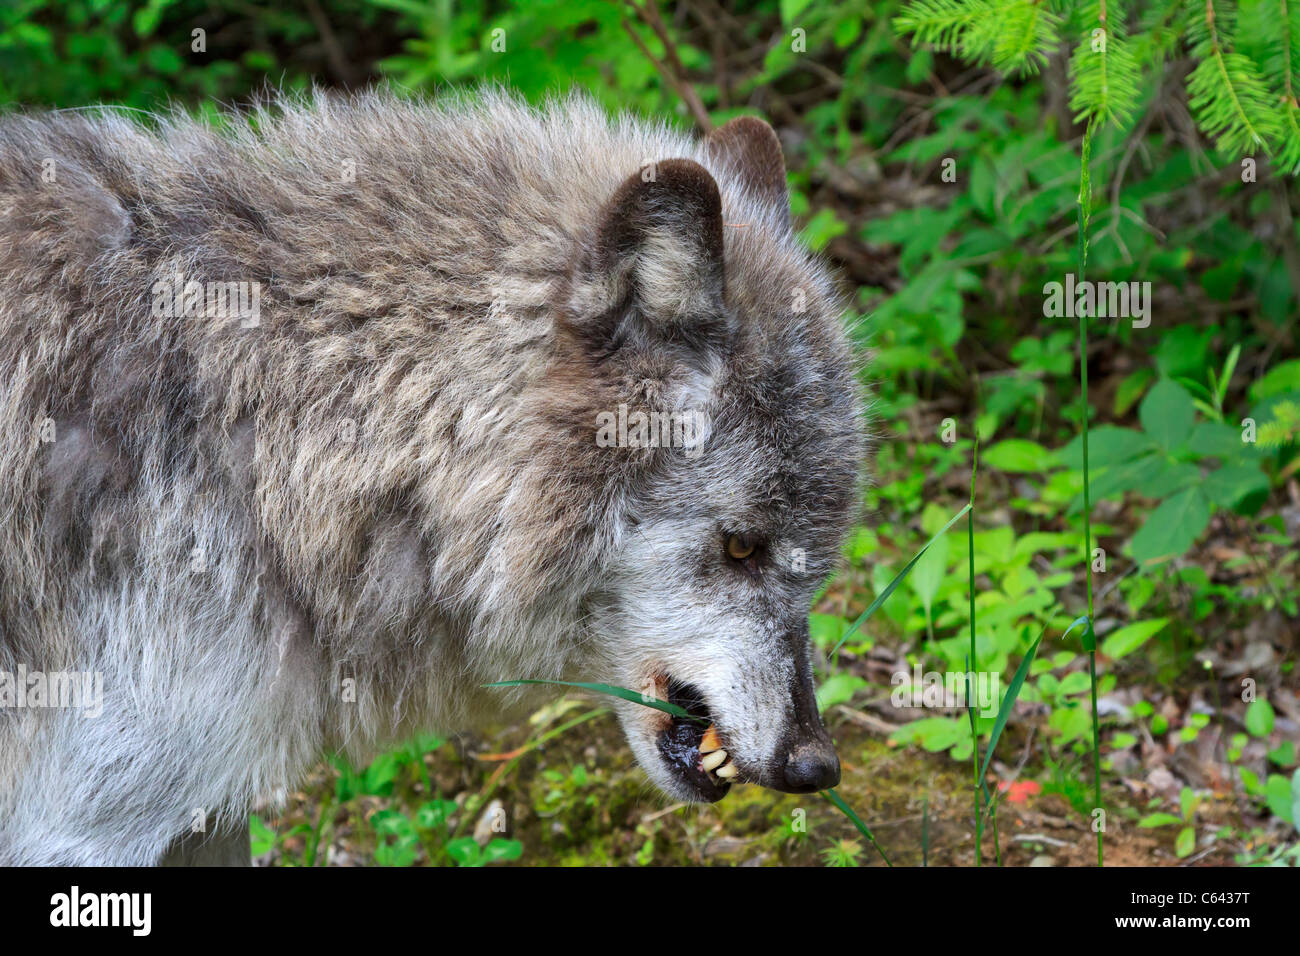 Grey wolf, Canis lupus, eating grass. Columbia Valley, British Columbia, Canada. Wolves may eat grass to aid in digestion. Stock Photo